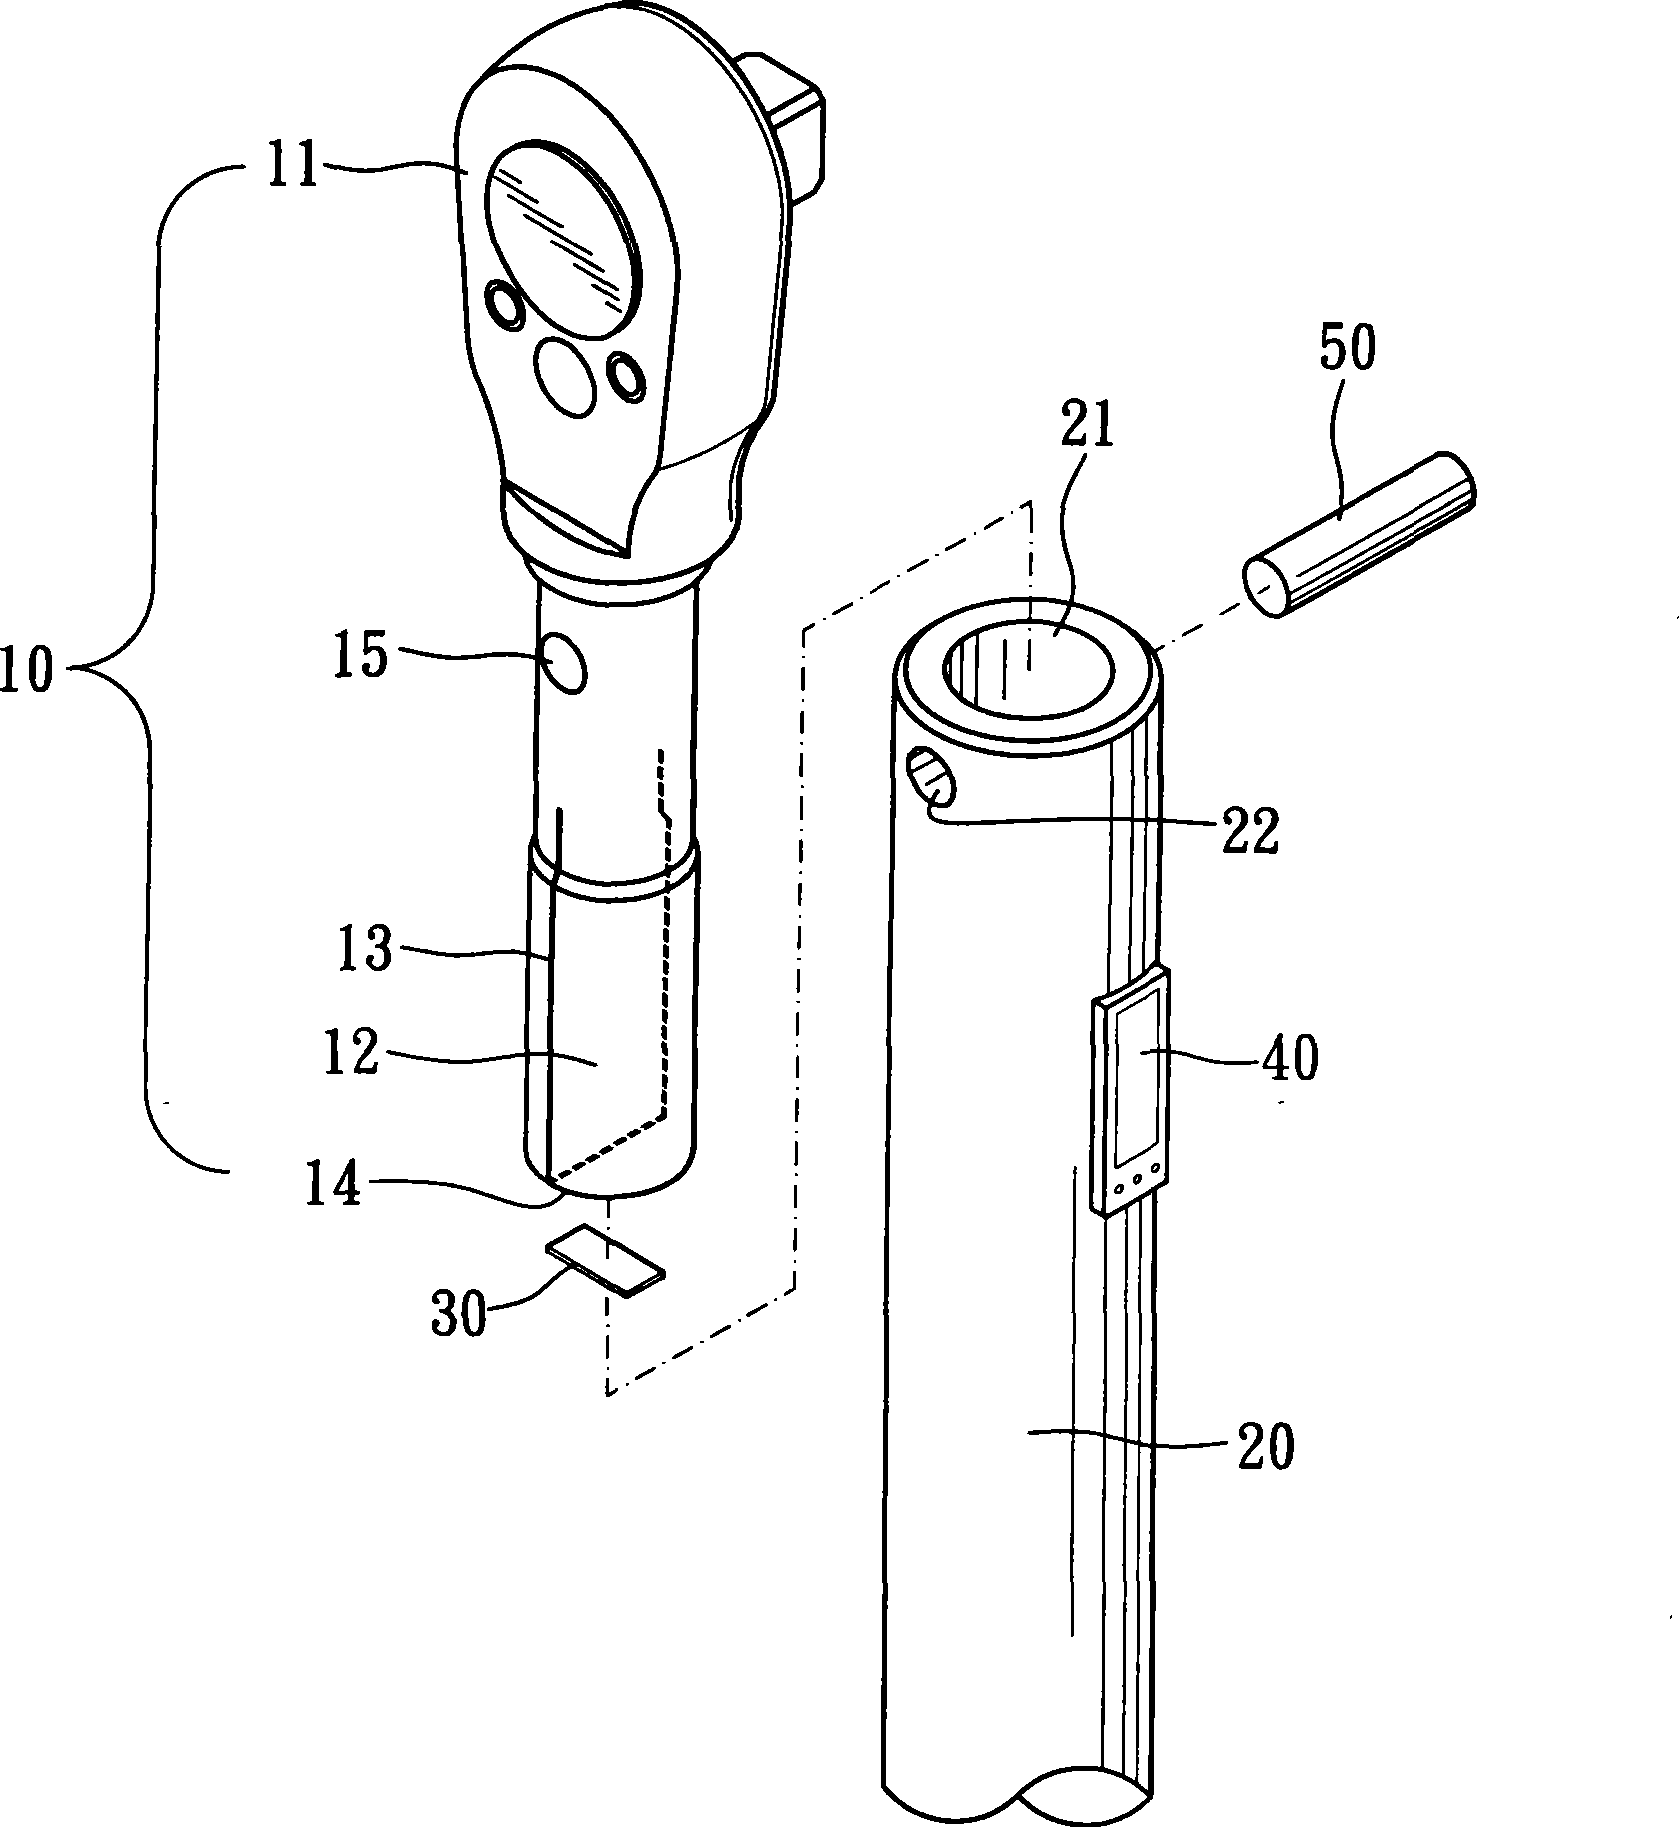 Electric torsion wrench measurement structure